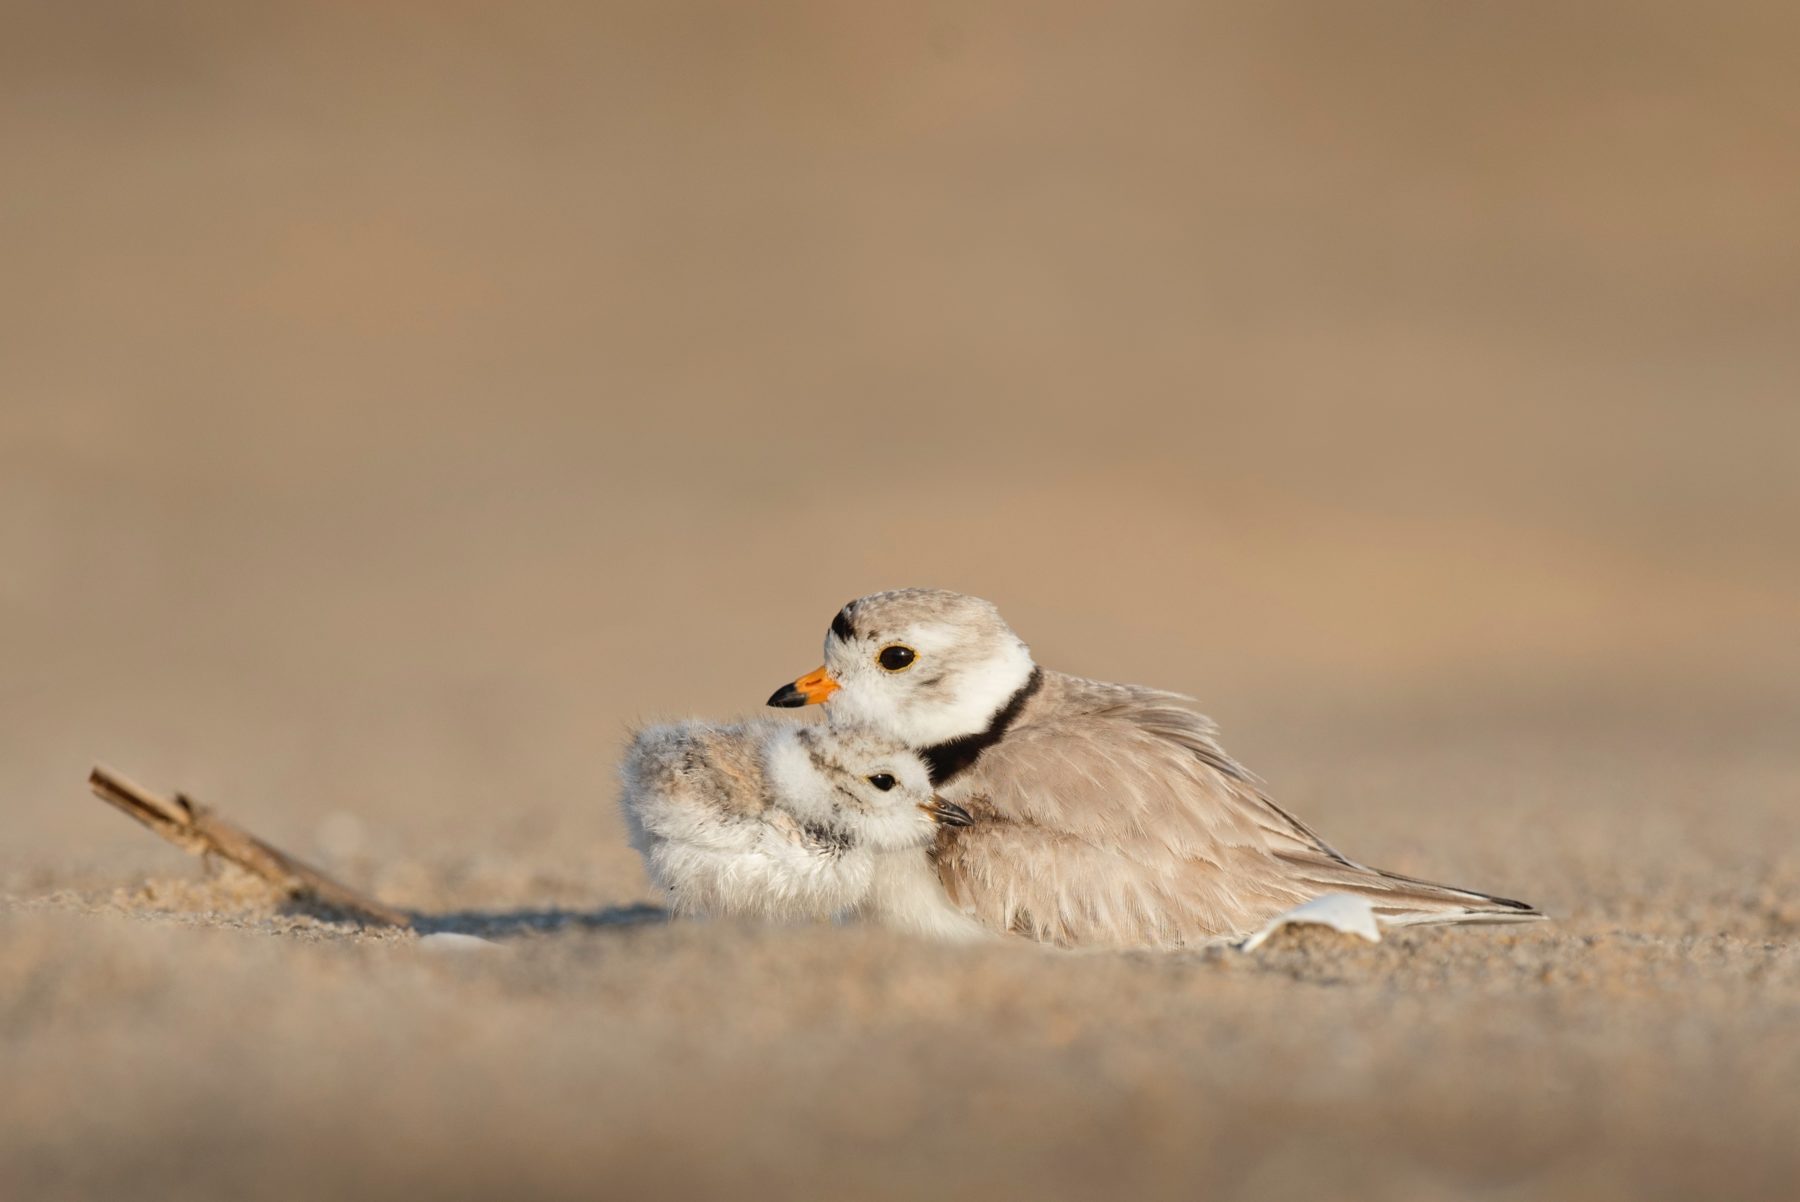 A new born chick with its parent.